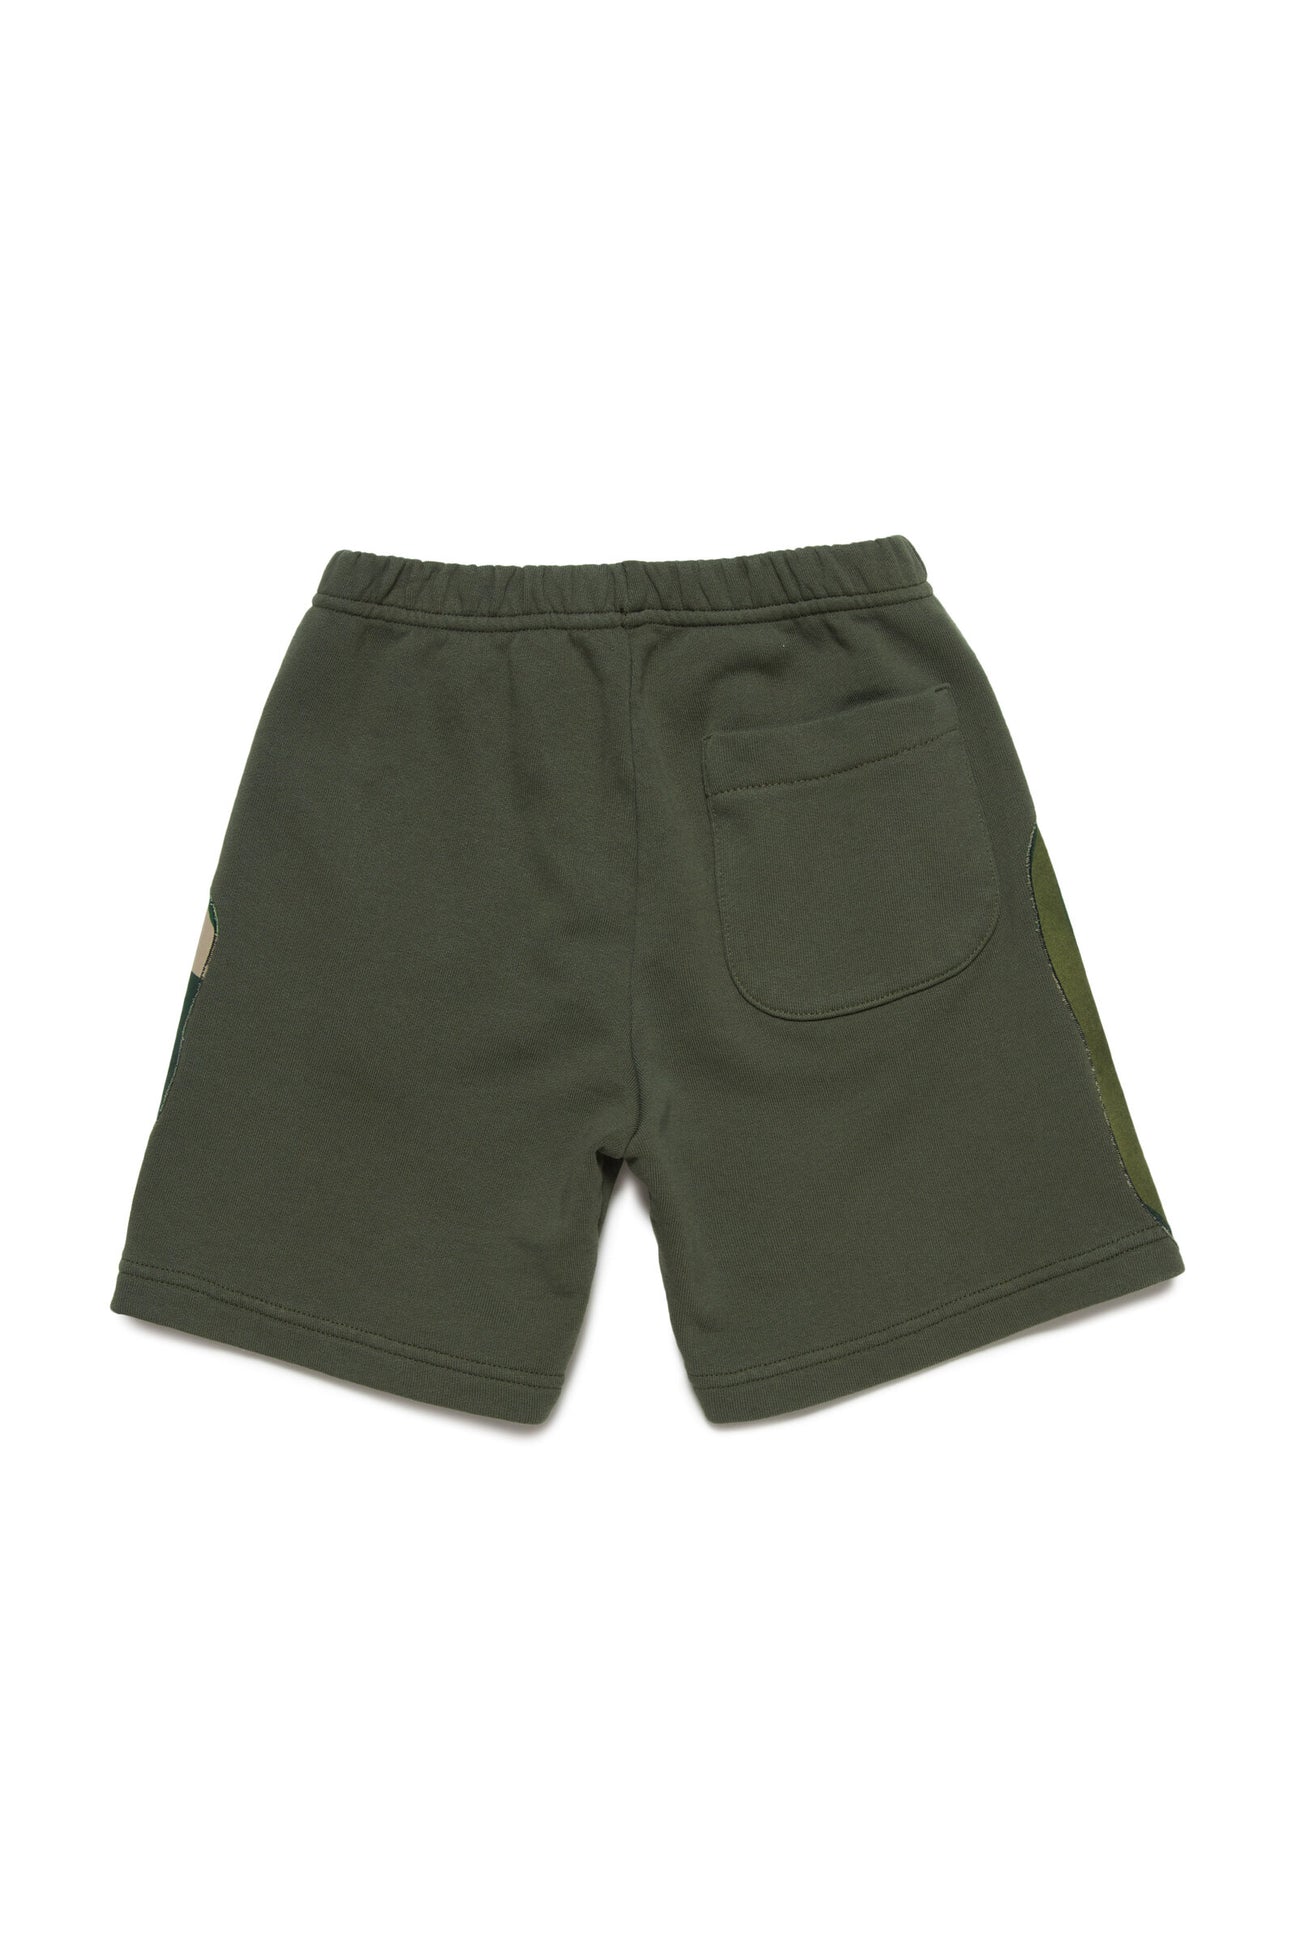 Plush shorts with rainforest patterned fabric application Plush shorts with rainforest patterned fabric application